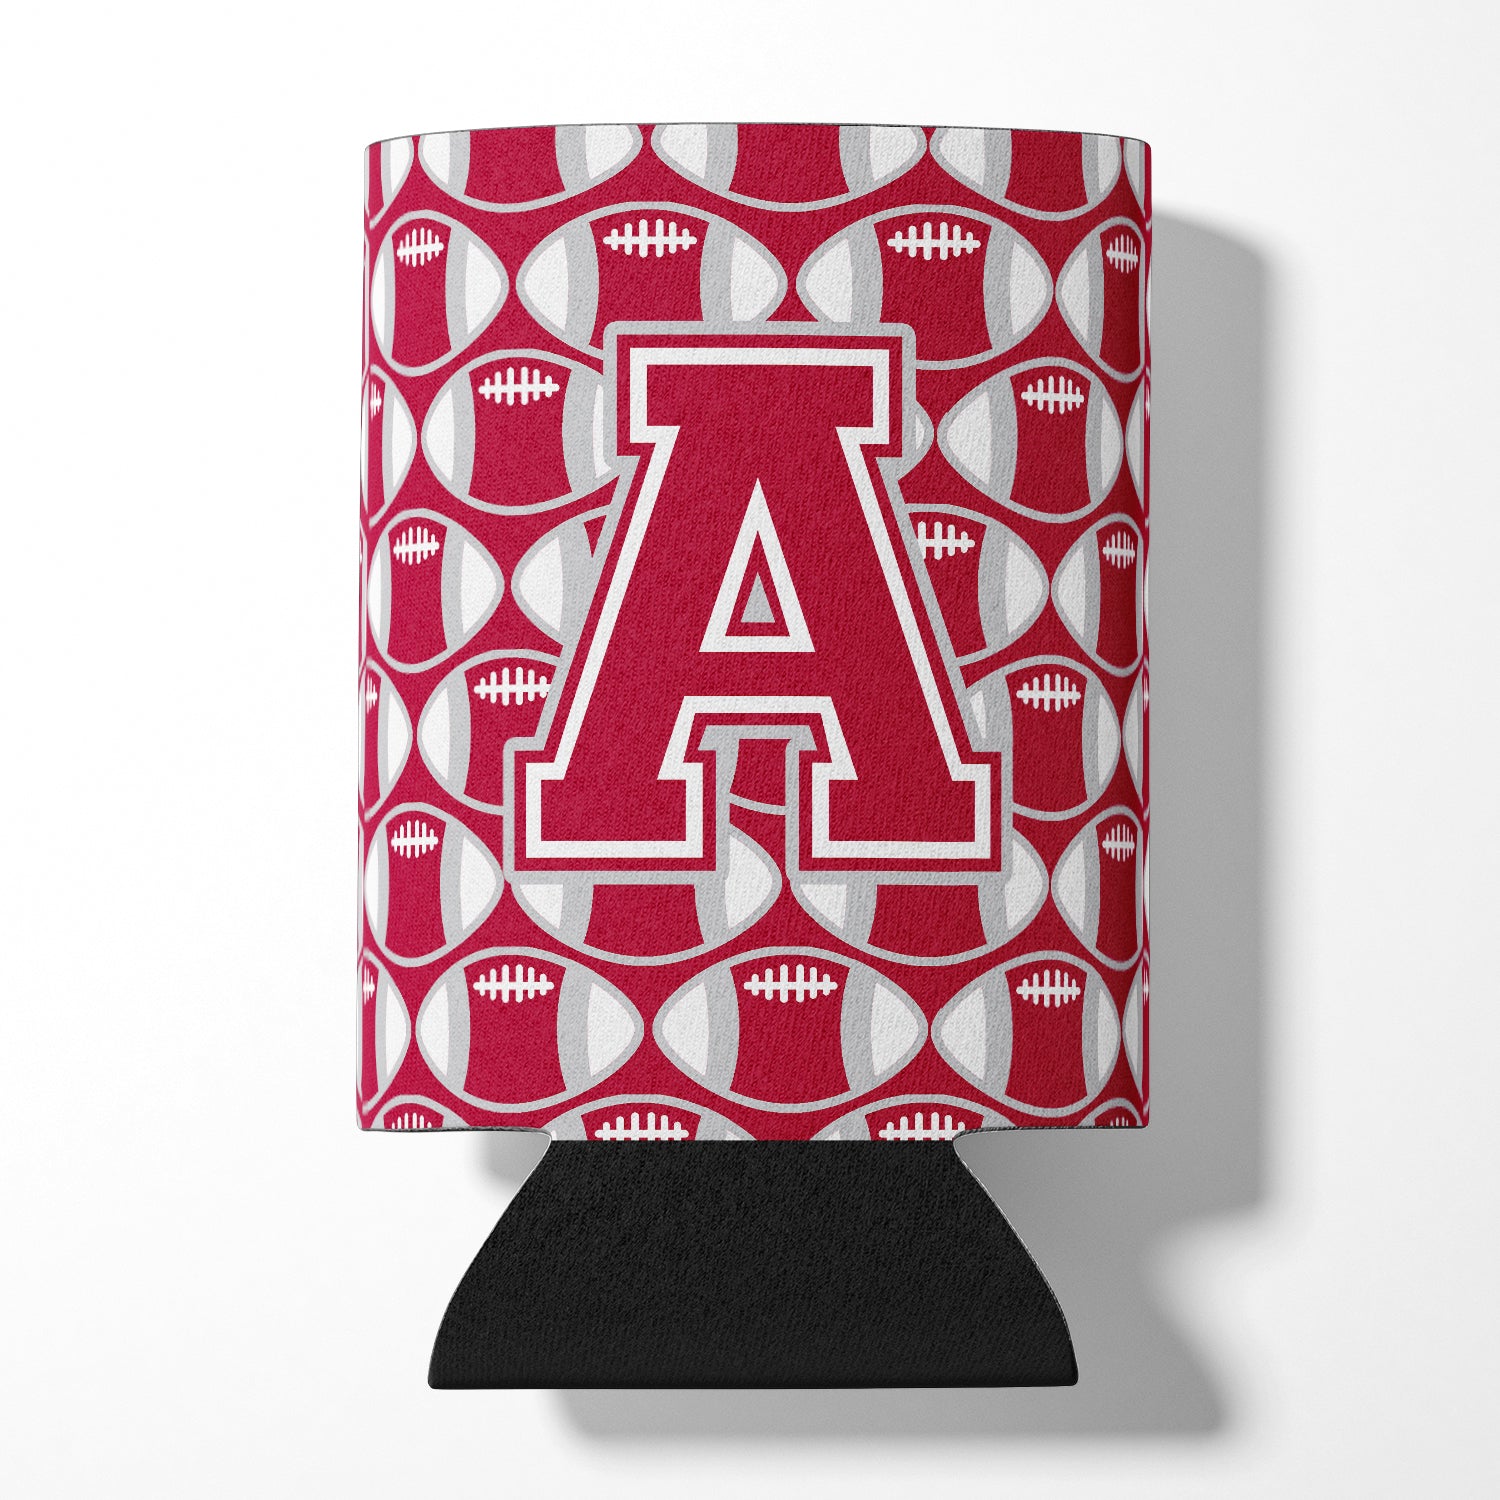 Letter A Football Crimson, grey and white Can or Bottle Hugger CJ1065-ACC.